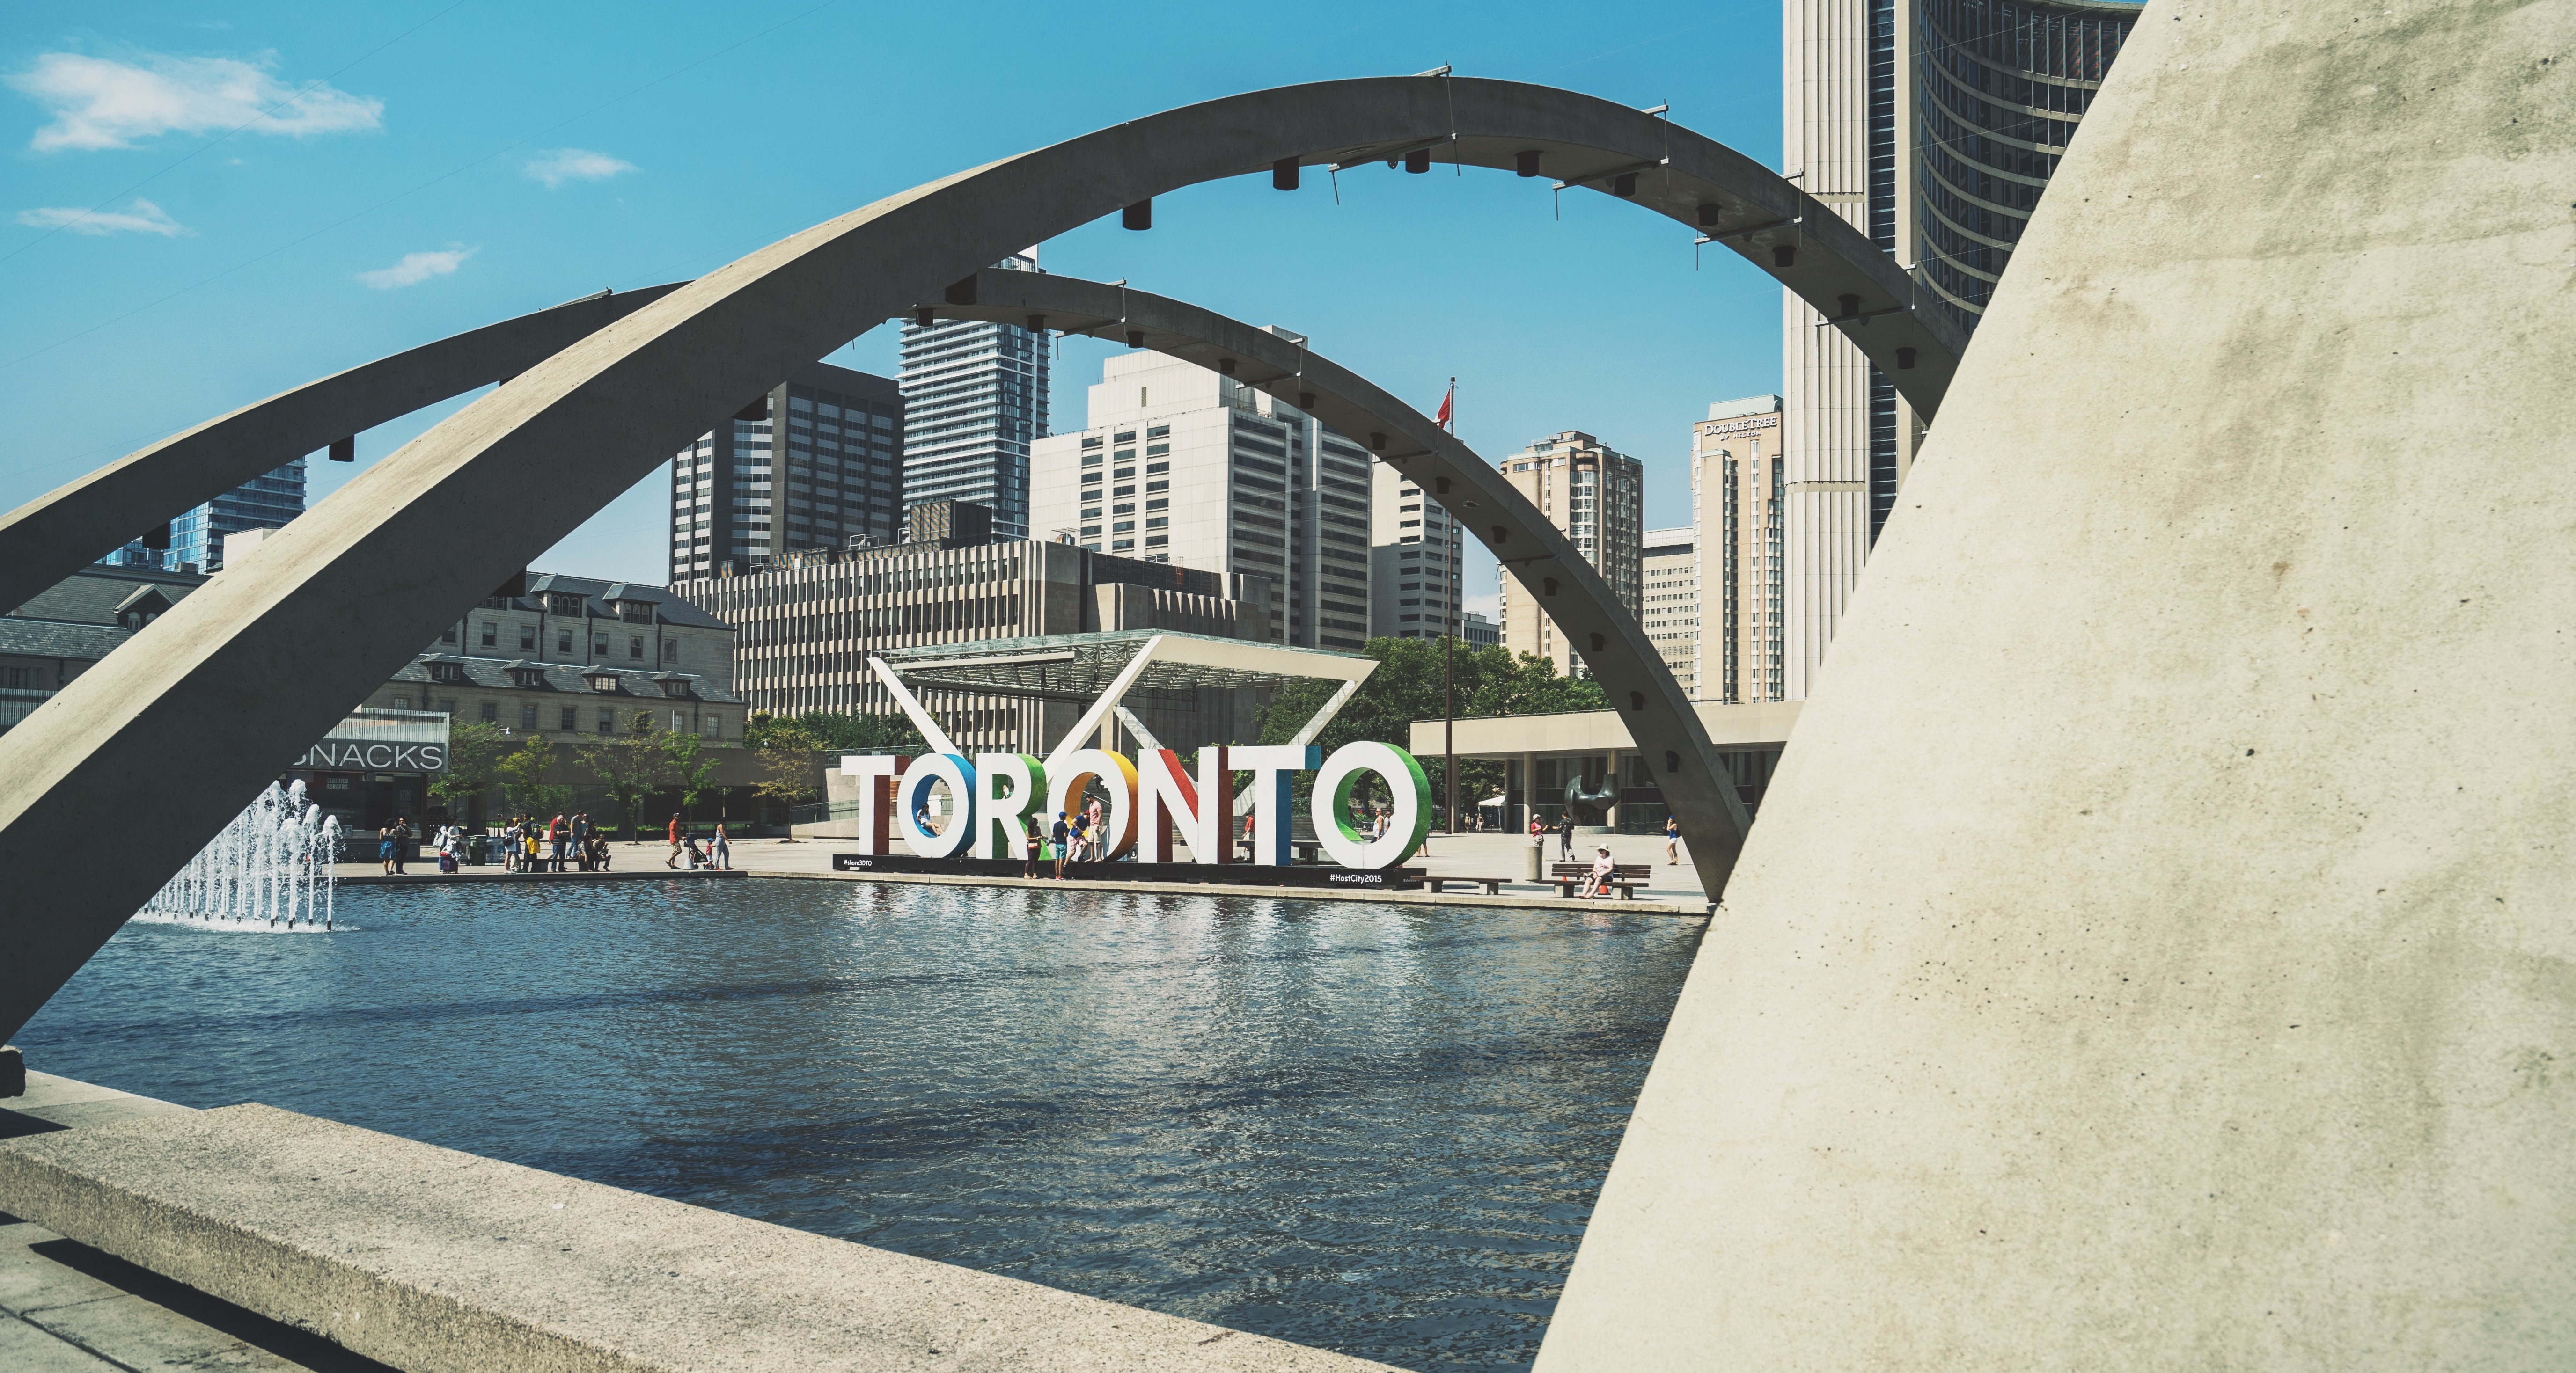 Deal Alert: Fly To Toronto For $192 Round-Trip